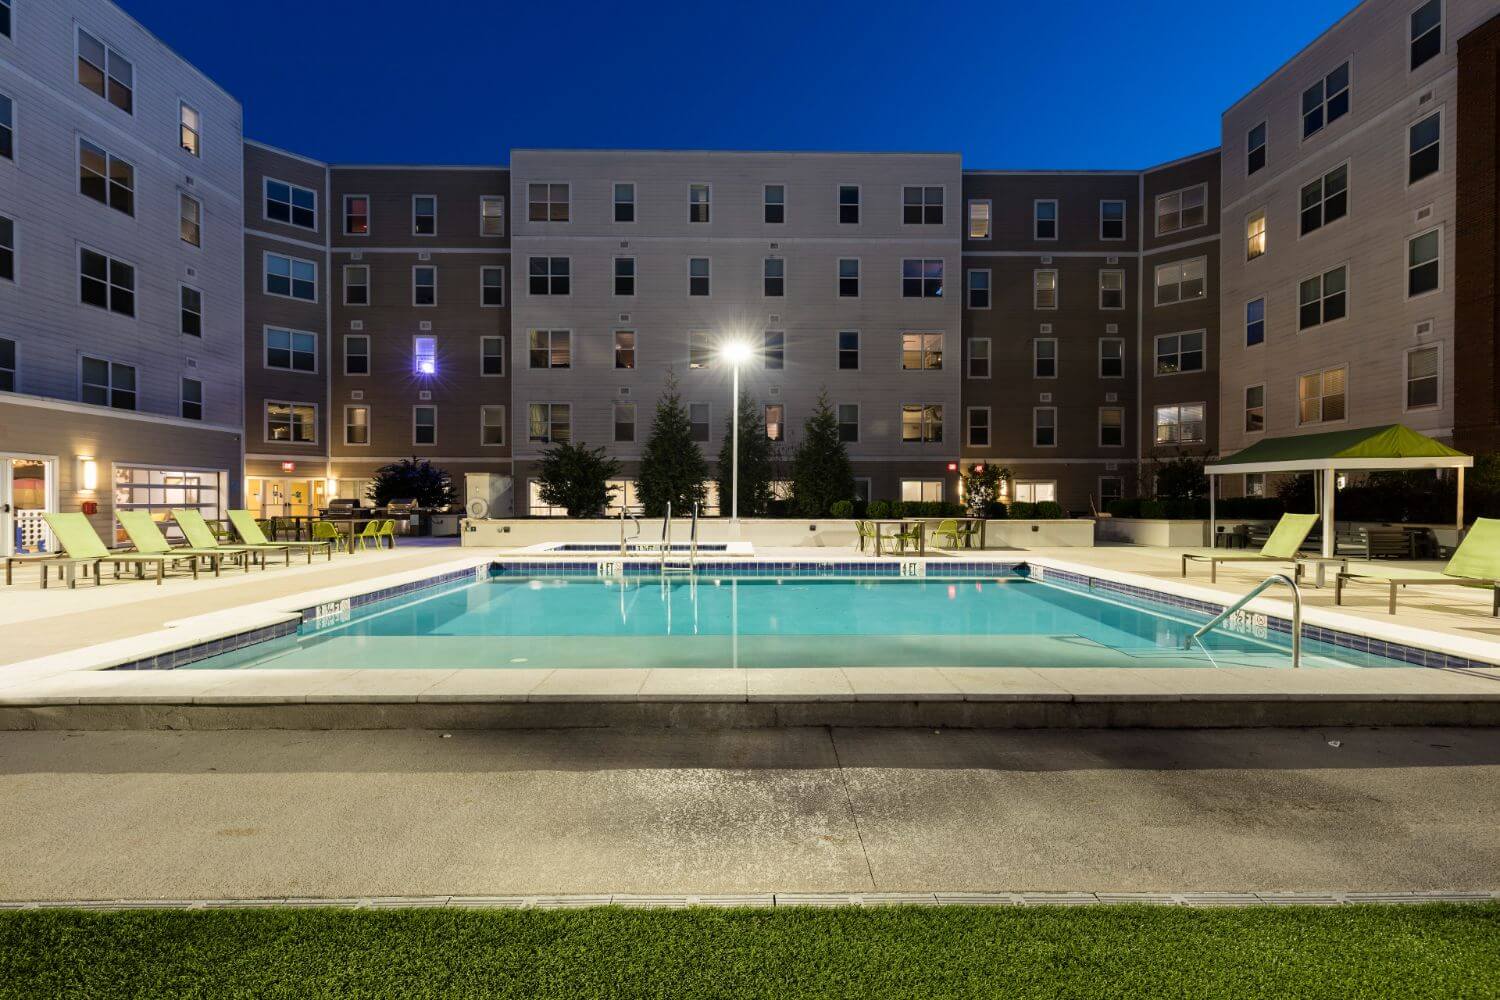 twilight view of the pool at west & wright apartments